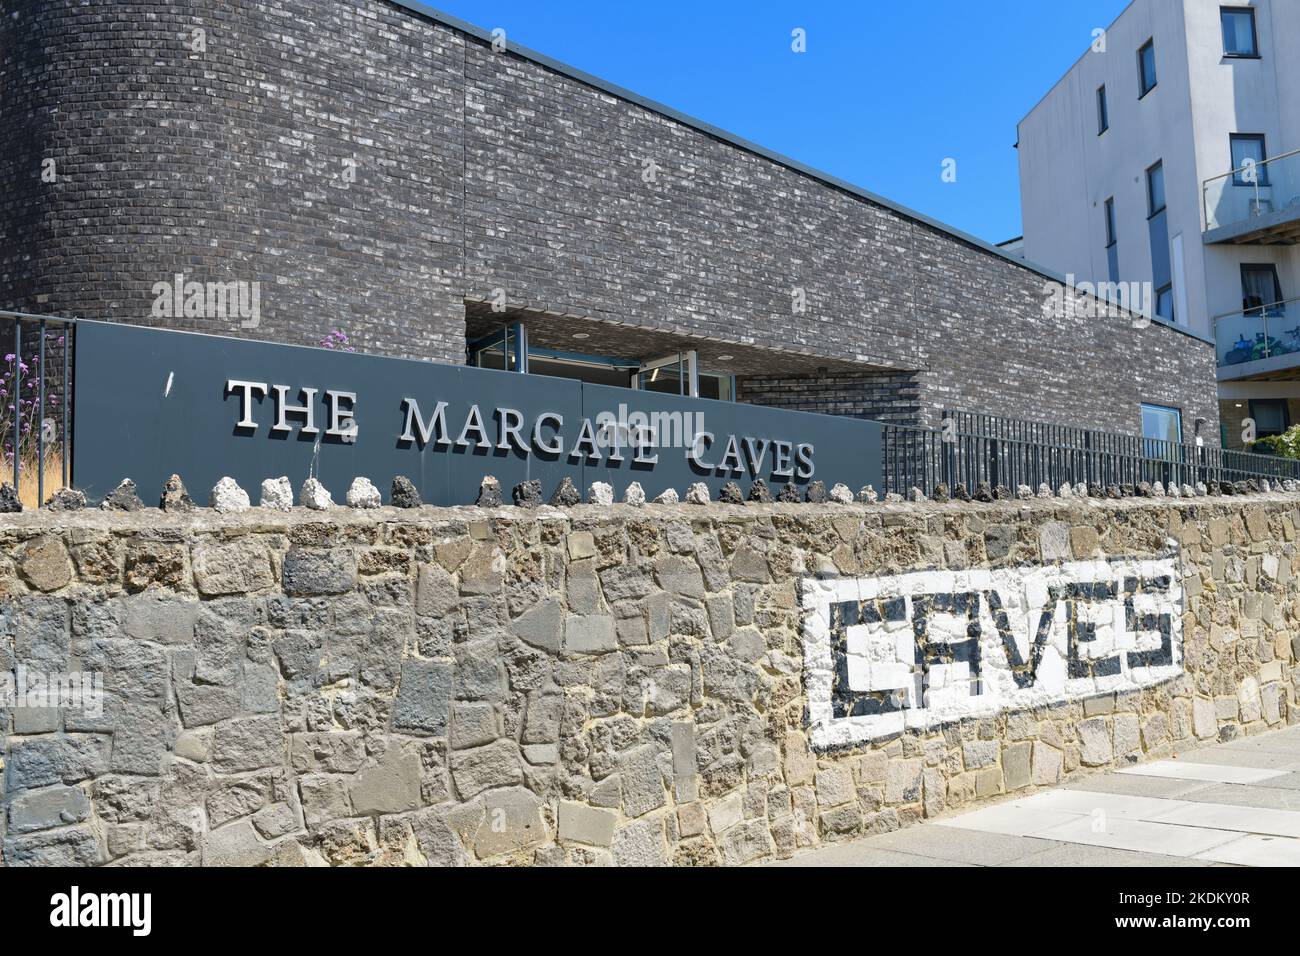 The Margate Caves, Margate, Kent, Angleterre, Royaume-Uni Banque D'Images